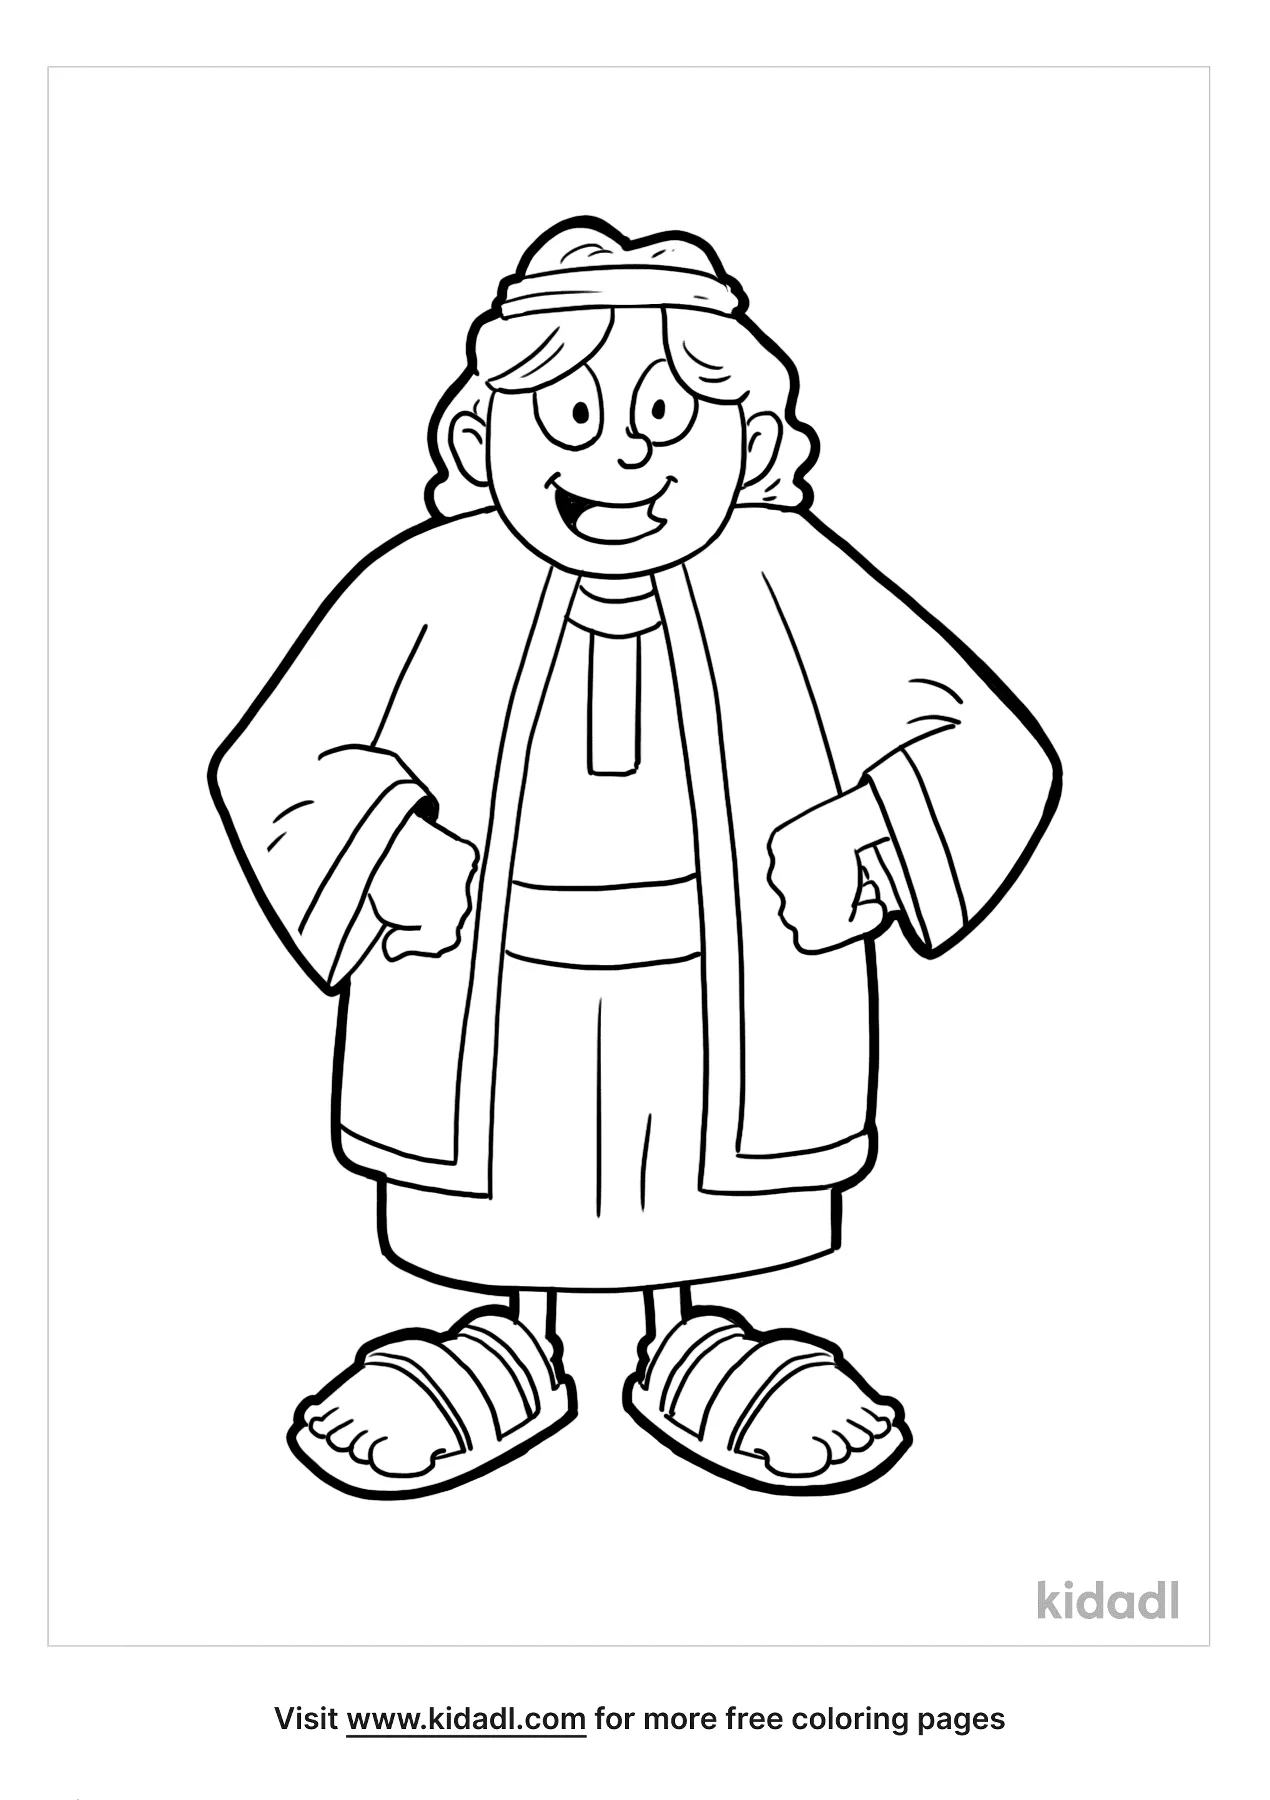 Free Joseph Coloring Page | Coloring Page Printables | Kidadl